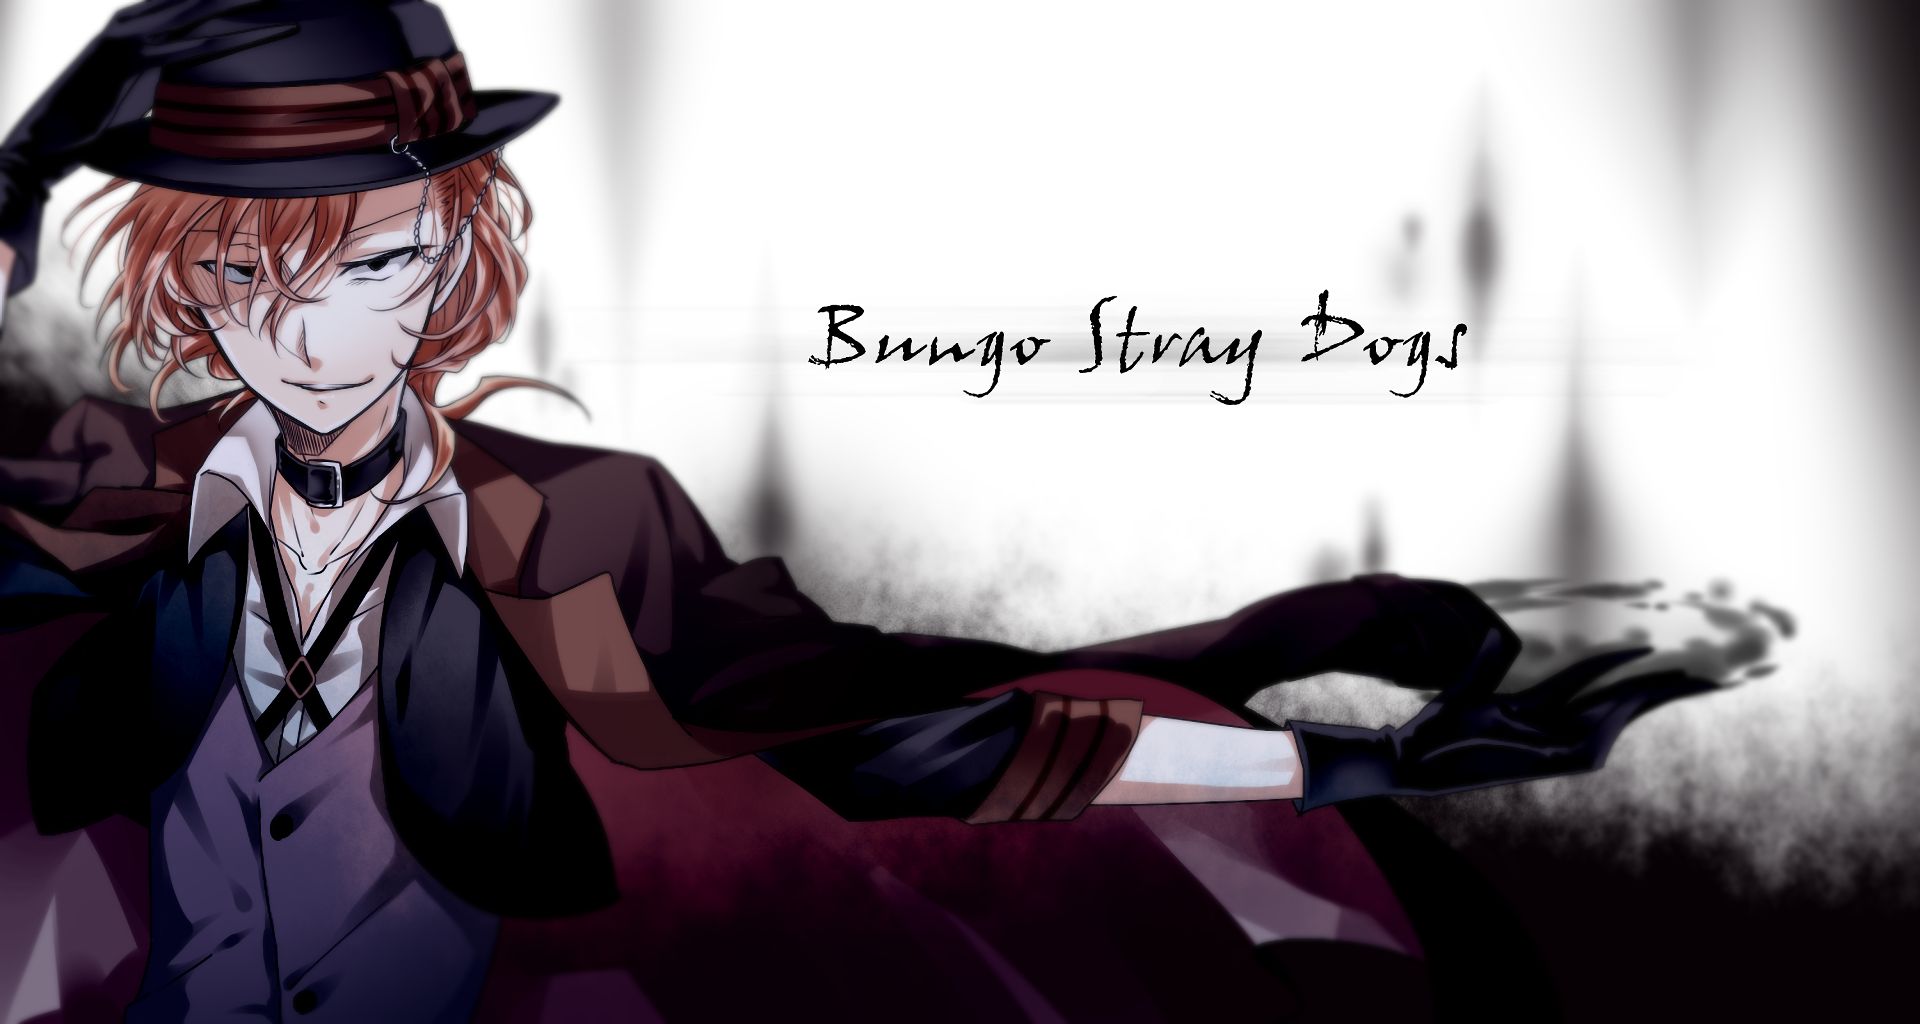 Bungou Stray Dogs wallpapers for desktop, download free Bungou Stray Dogs  pictures and backgrounds for PC 